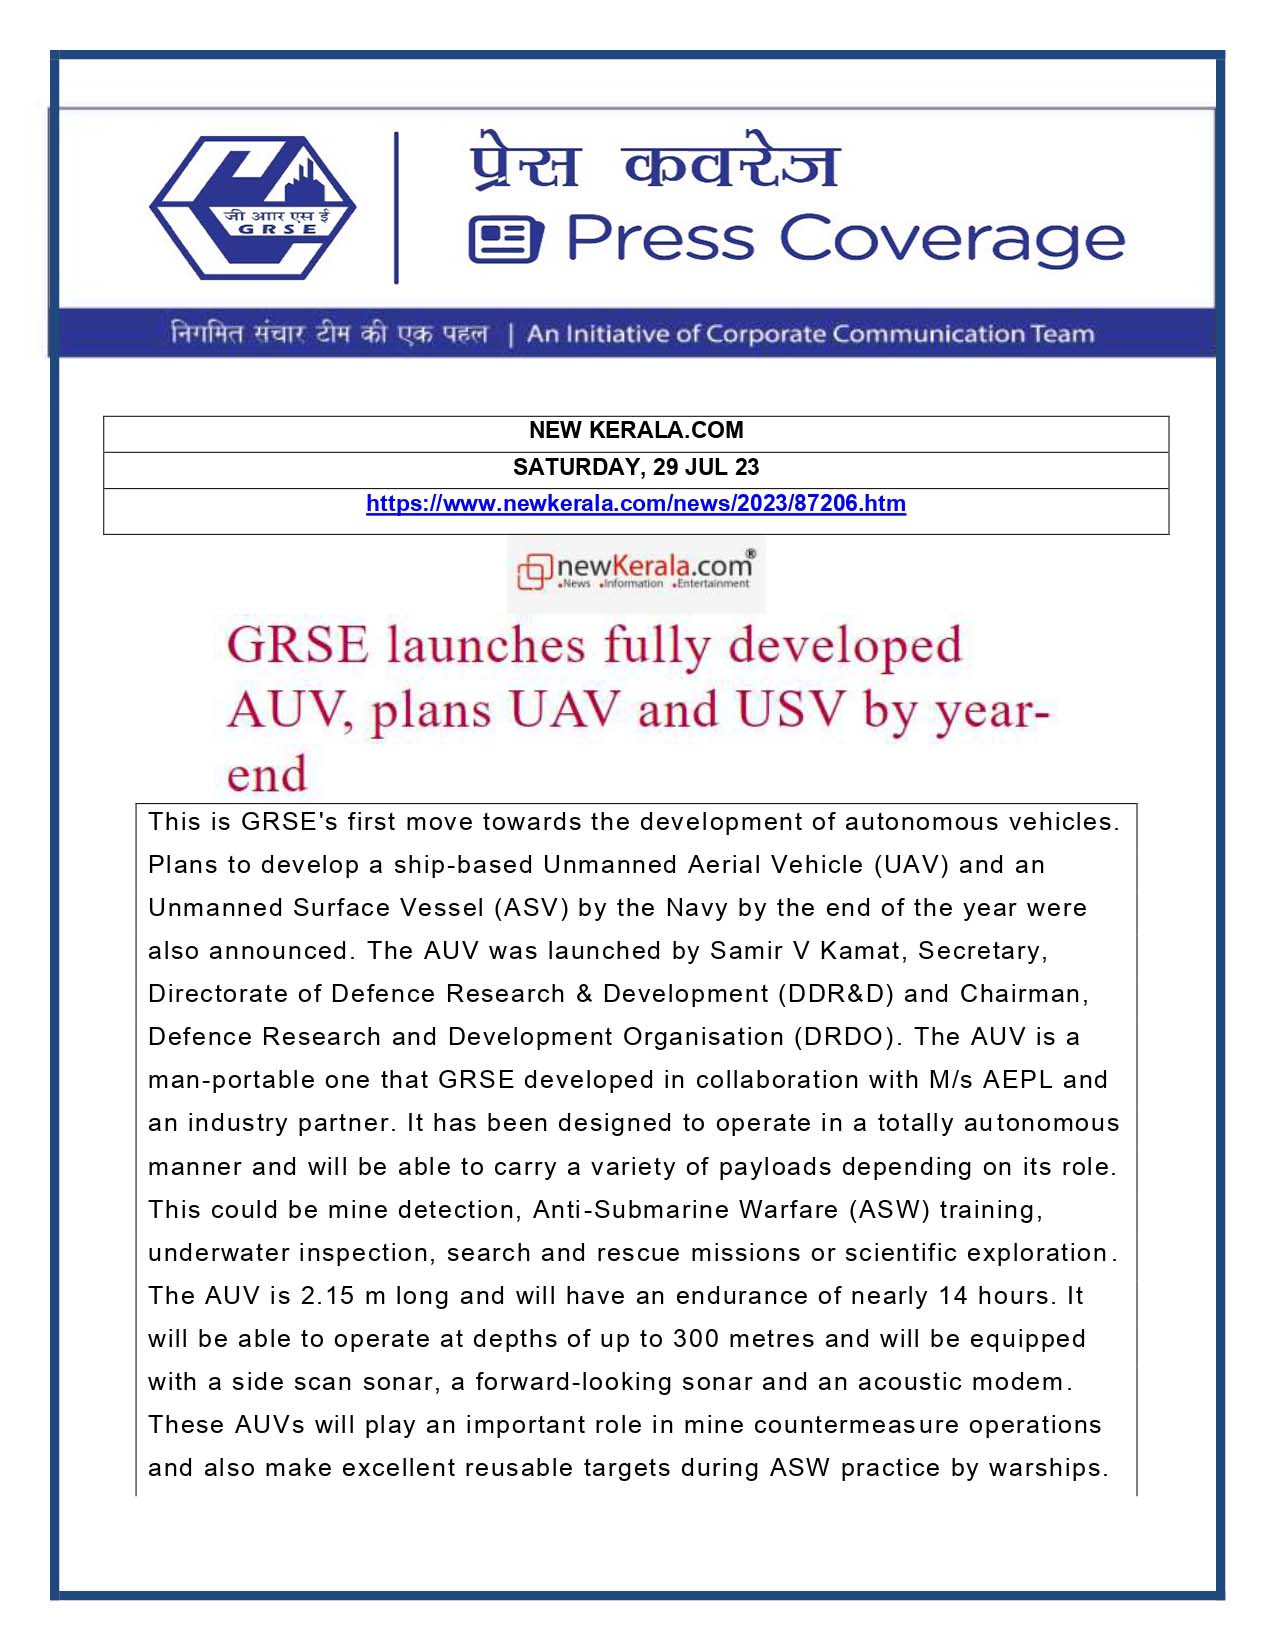 Press Coverage : New Kerala, 29 Jul 23 : GSRE launches fully developed AUV, plans UAV and USV by year-end